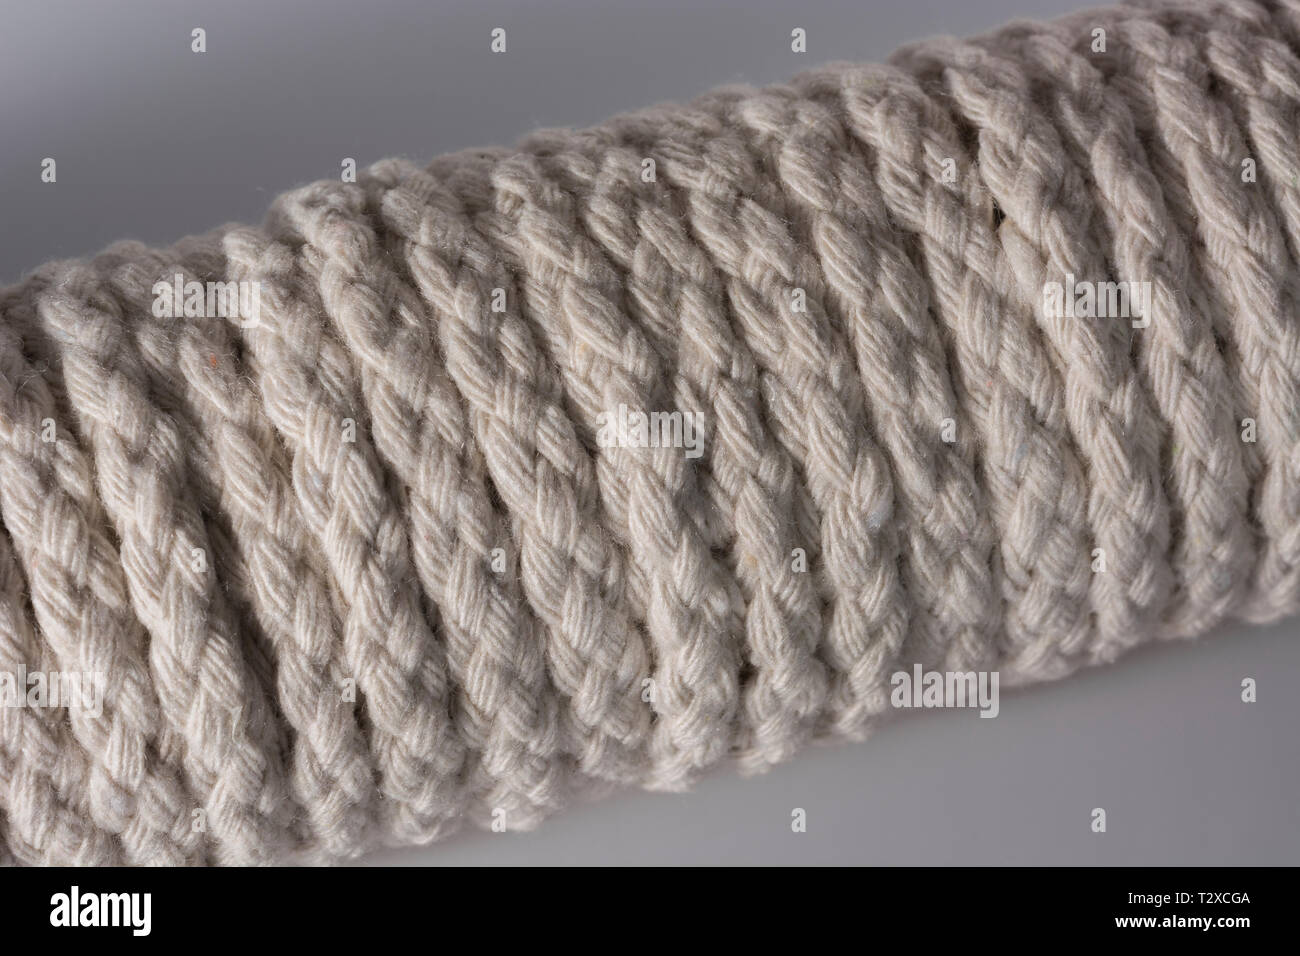 Close-up of a hank of natural multi-strand cotton cord - used for clotheslines and other jobs. Metaphor 'given enough rope'. Stock Photo